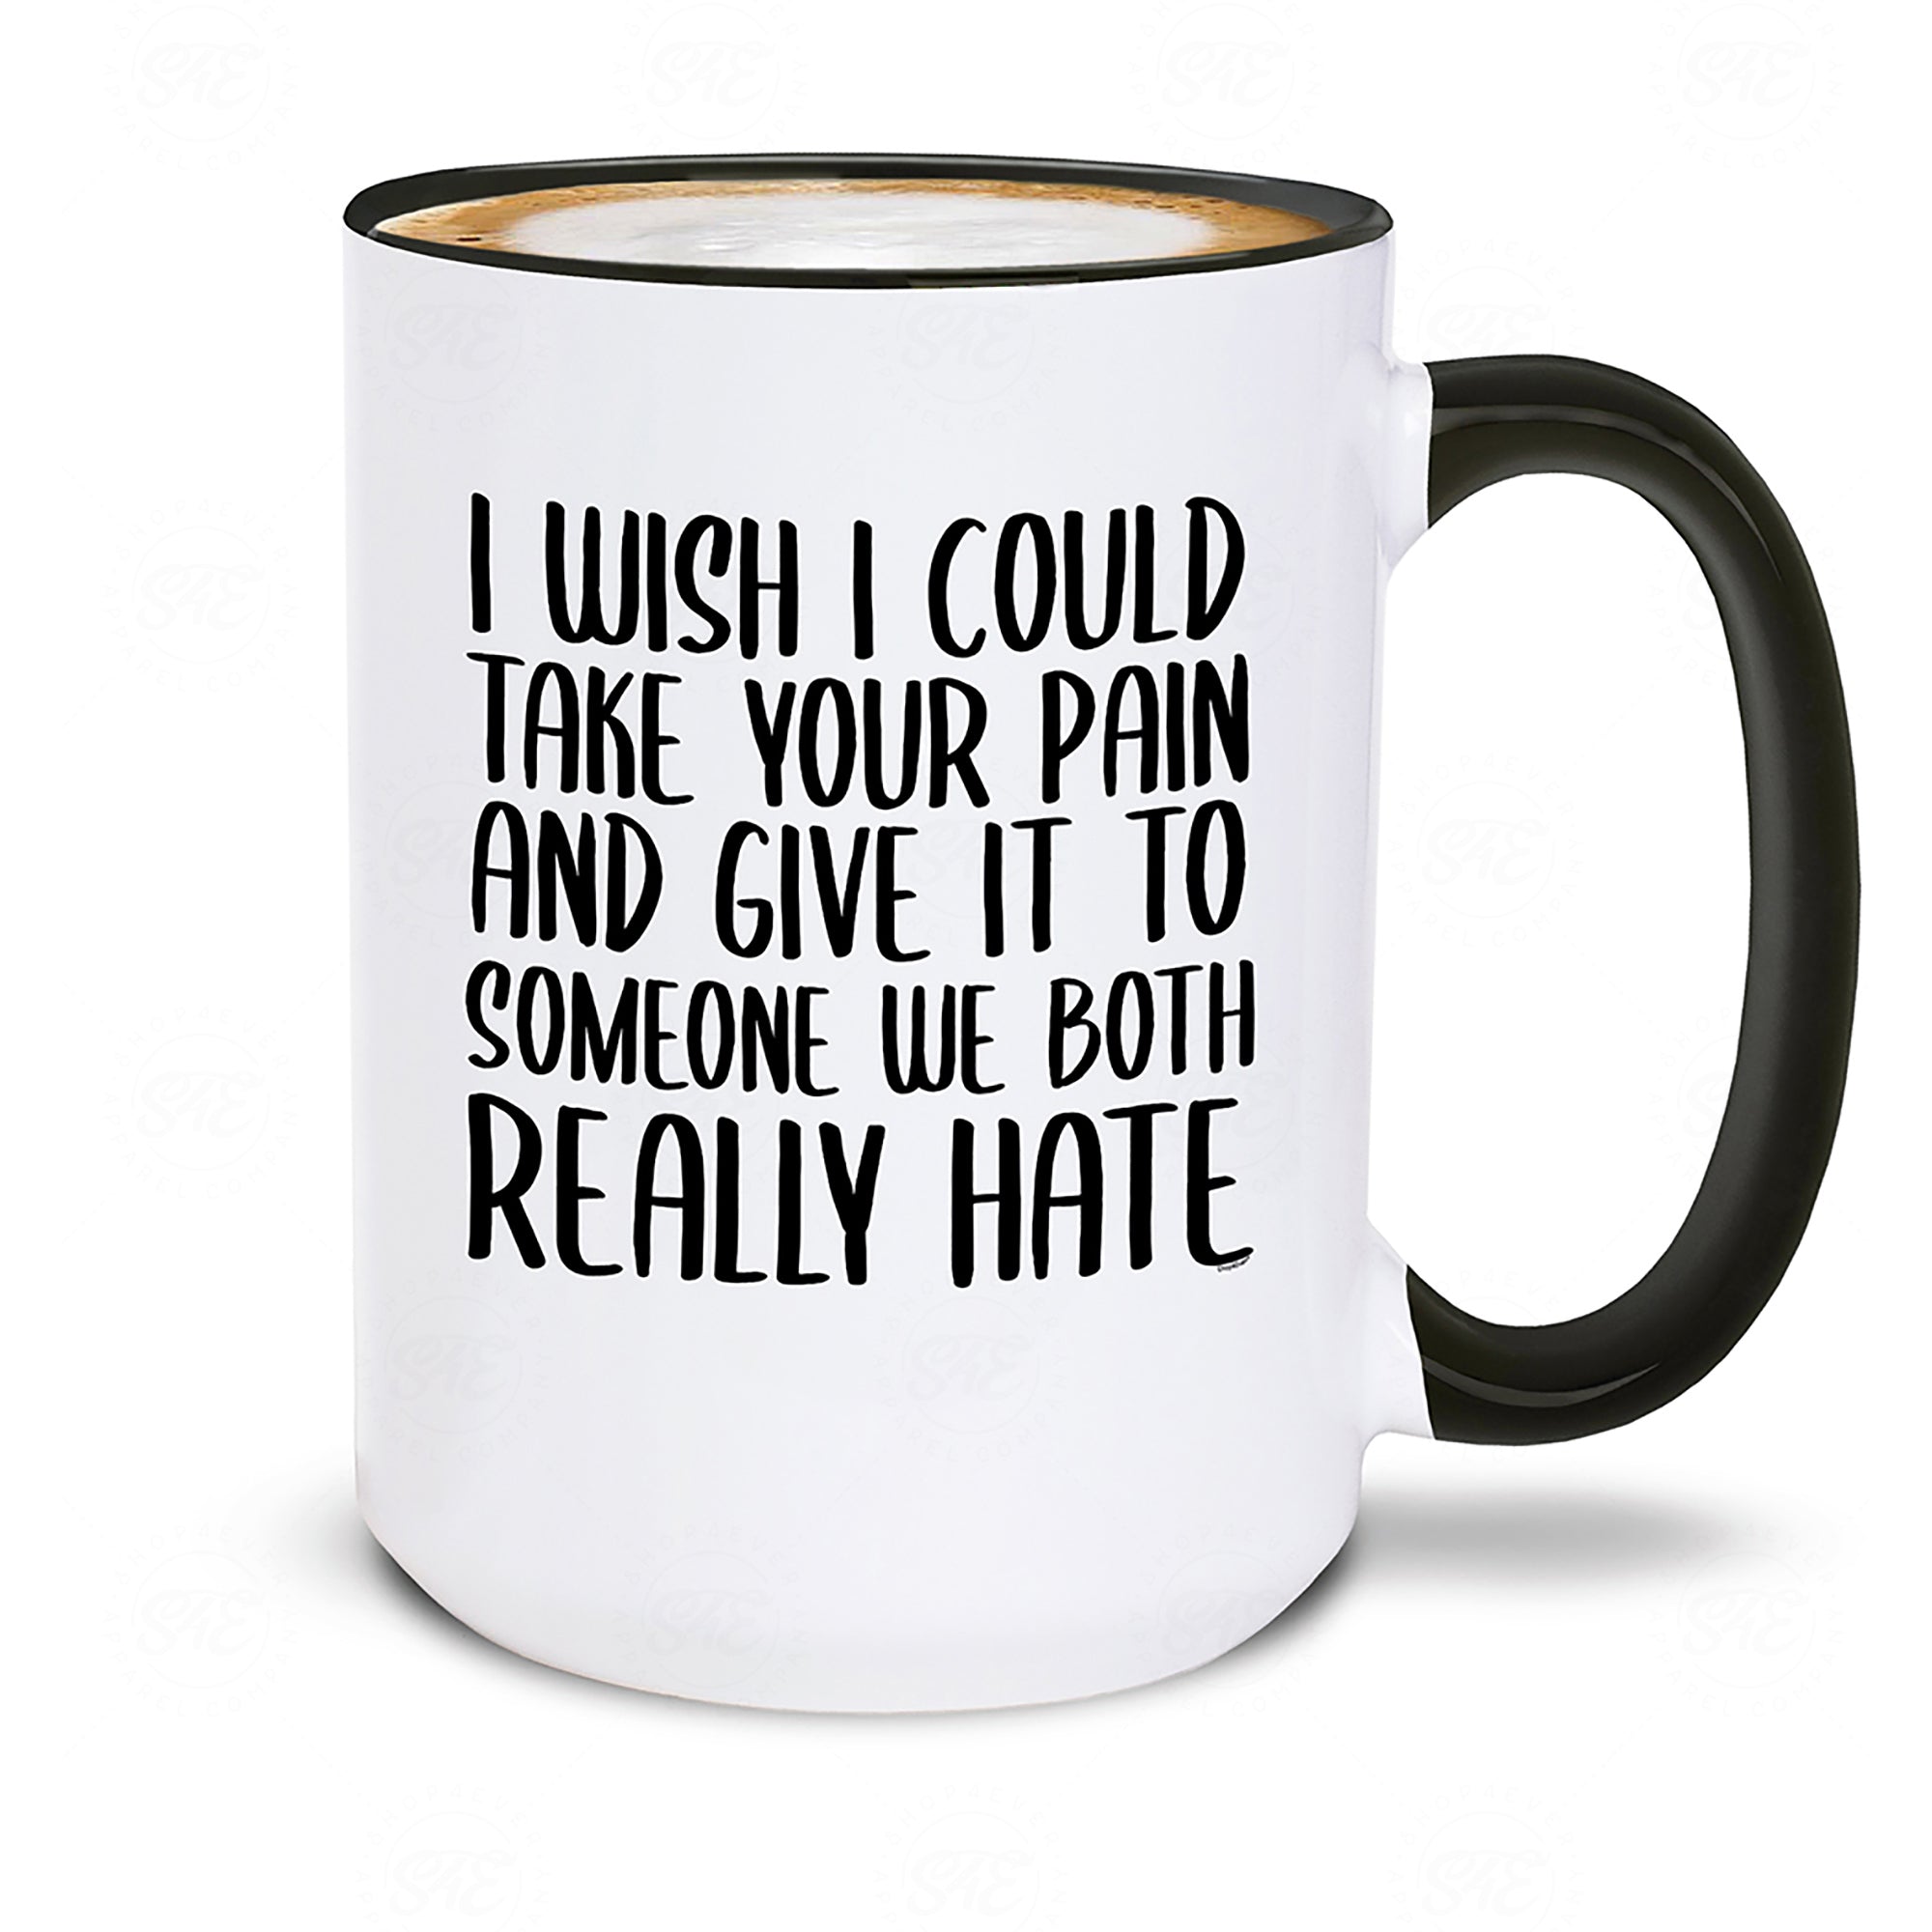 I Wish I Could Take Your Pain And Give It To Someone We Both Really Hate Ceramic Coffee Mug Funny Divorce Breakup Surgery Get Well Soon Mug (Black Handle, 15 oz.)